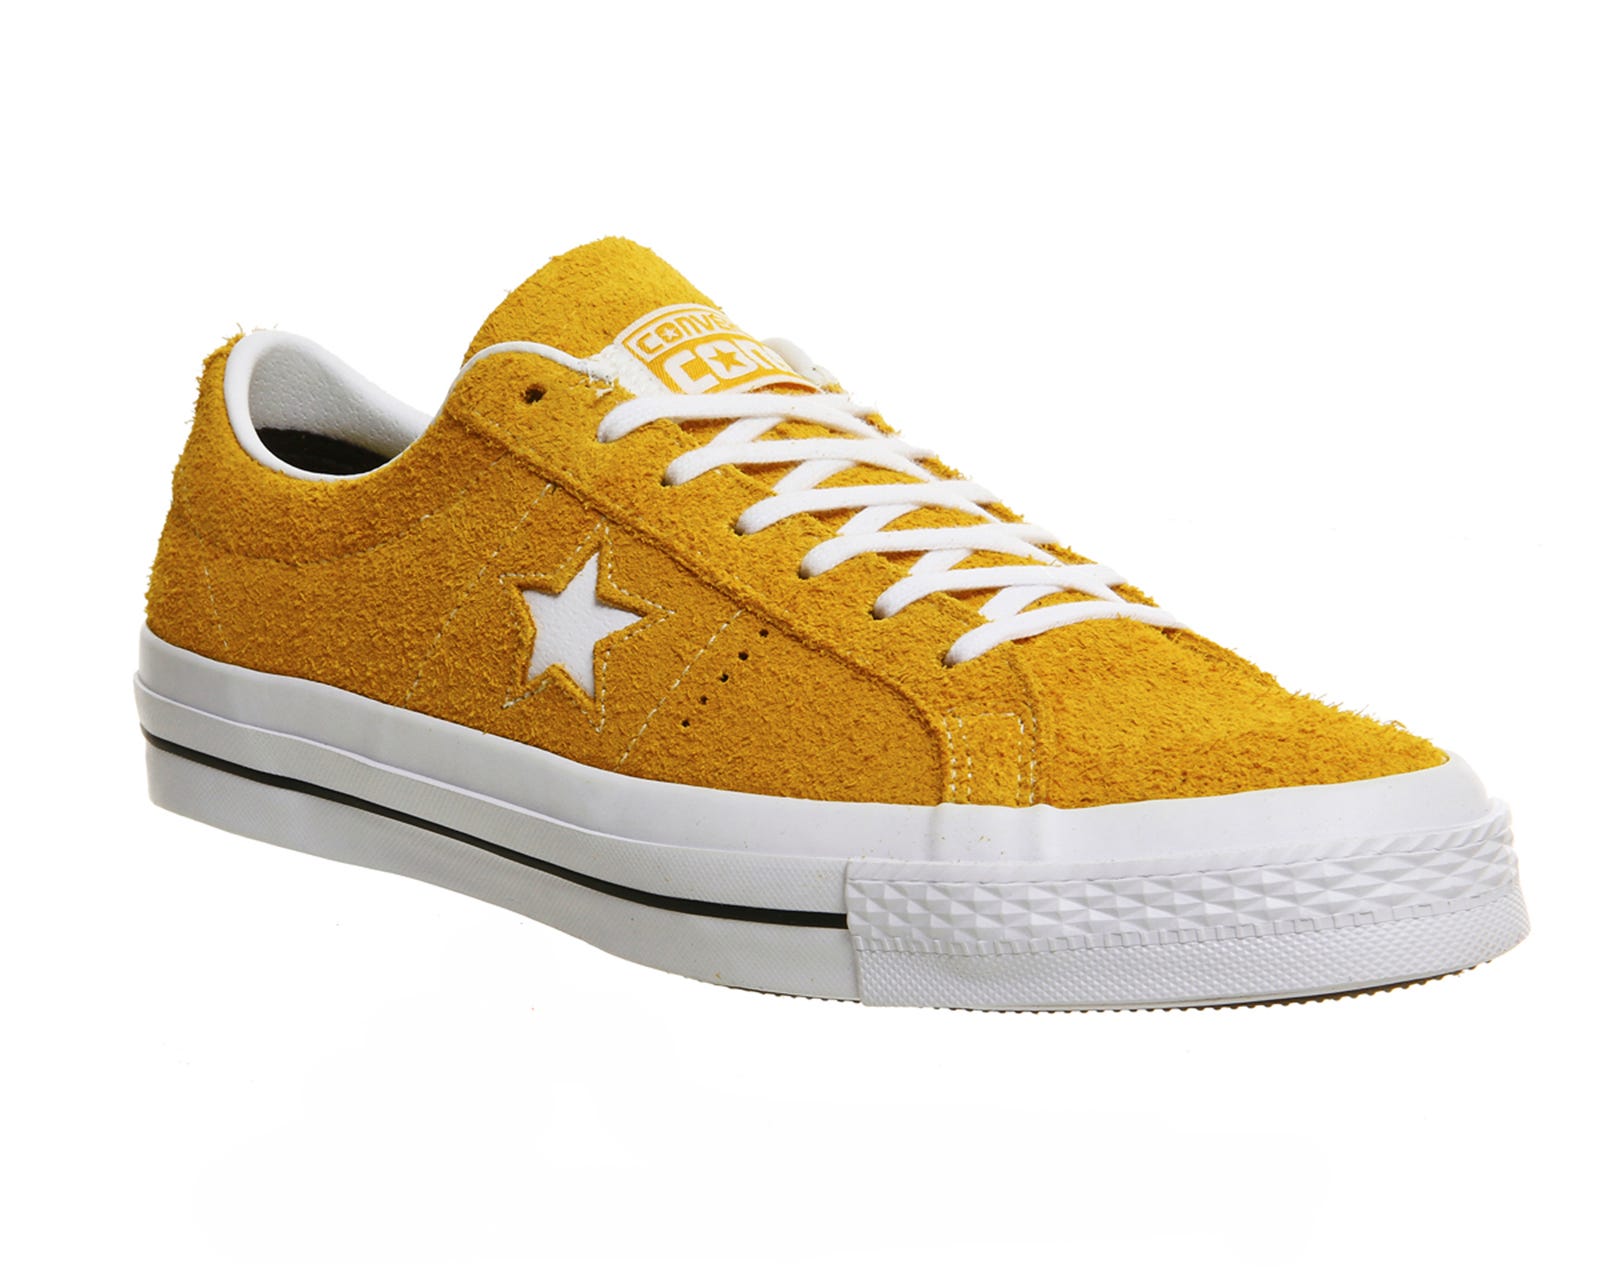 converse one star yellow sneakers